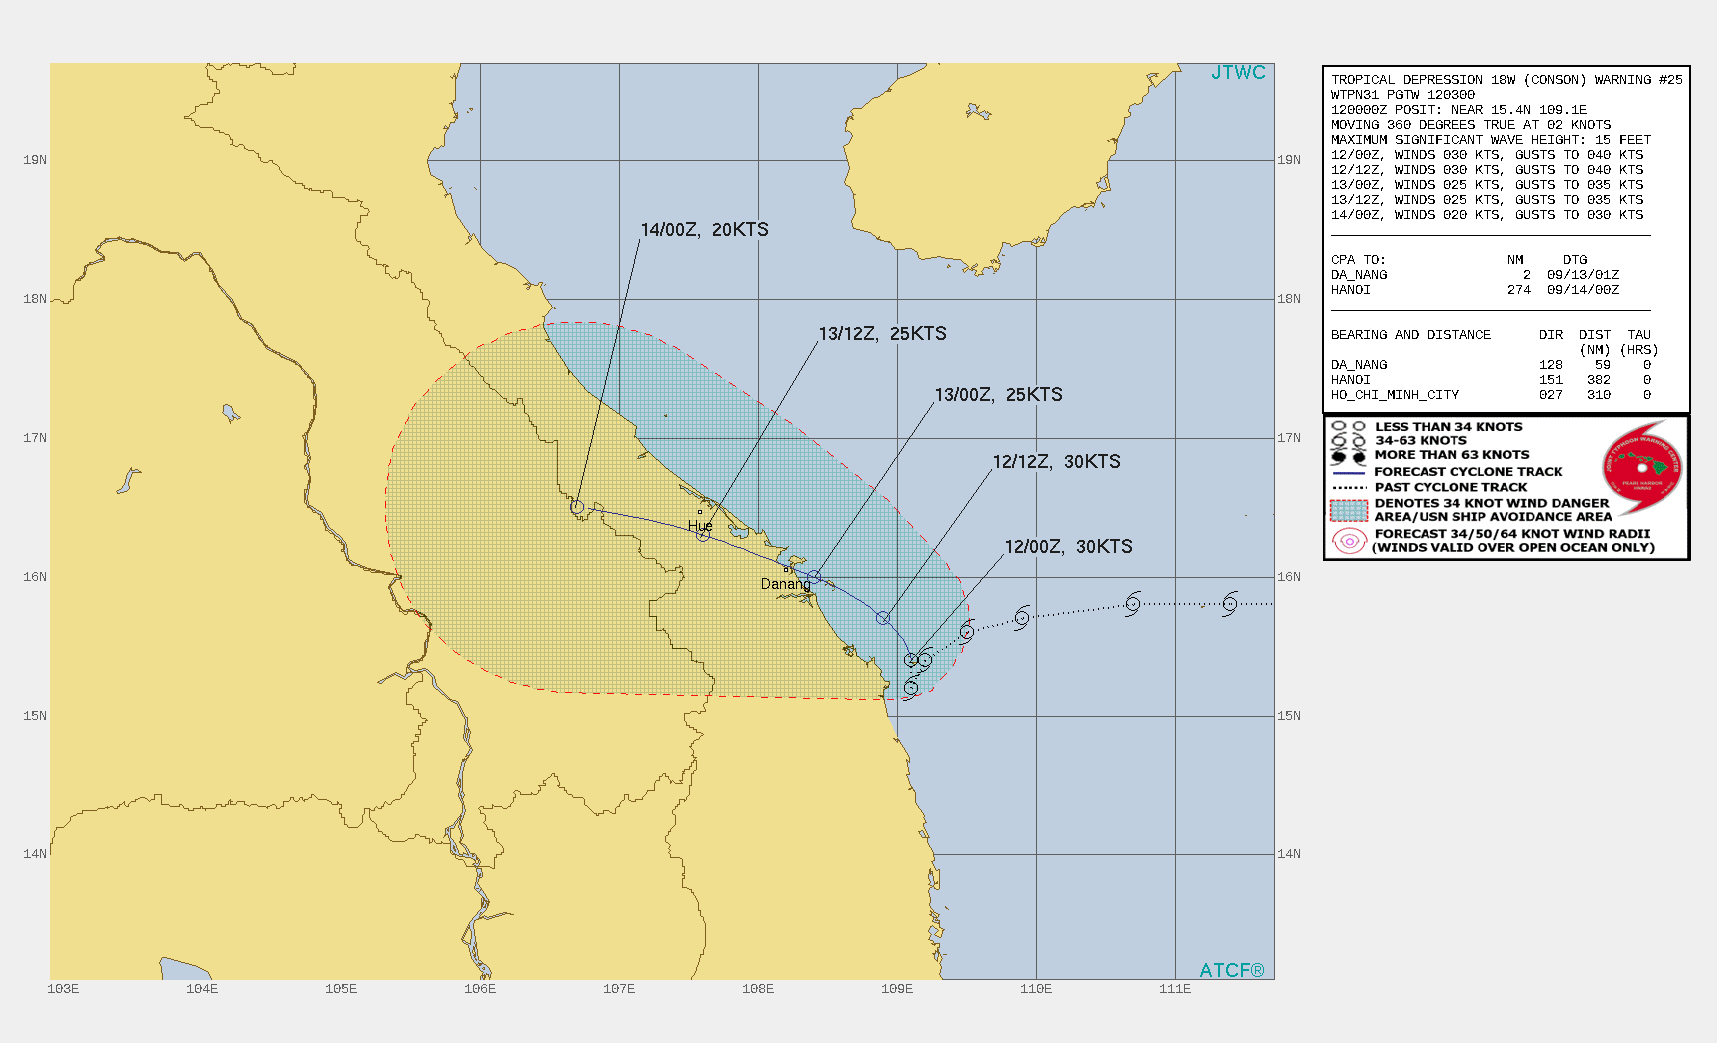 TD 19W(CONSON). WARNING 25 ISSUED AT 12/03UTC.SIGNIFICANT FORECAST CHANGES: THERE ARE NO SIGNIFICANT CHANGES TO THE FORECAST FROM THE PREVIOUS WARNING.  FORECAST DISCUSSION: TD 18W IS FORECAST TO MAINTAIN A QUASI-STATIONARY MOTION THROUGH 12H UNDER A COMPETING STEERING ENVIRONMENT. AFTER 12H, THE SUBTROPICAL RIDGE TO THE NORTH IS EXPECTED TO STRENGTHEN, ALLOWING TD 18W TO ACCELERATE WEST-NORTHWESTWARD INTO VIETNAM. ONCE THE SYSTEM TRACKS OVER THE MOUNTAINOUS TERRAIN OF VIETNAM, IT'S EXPECTED TO RAPIDLY DISSIPATE.